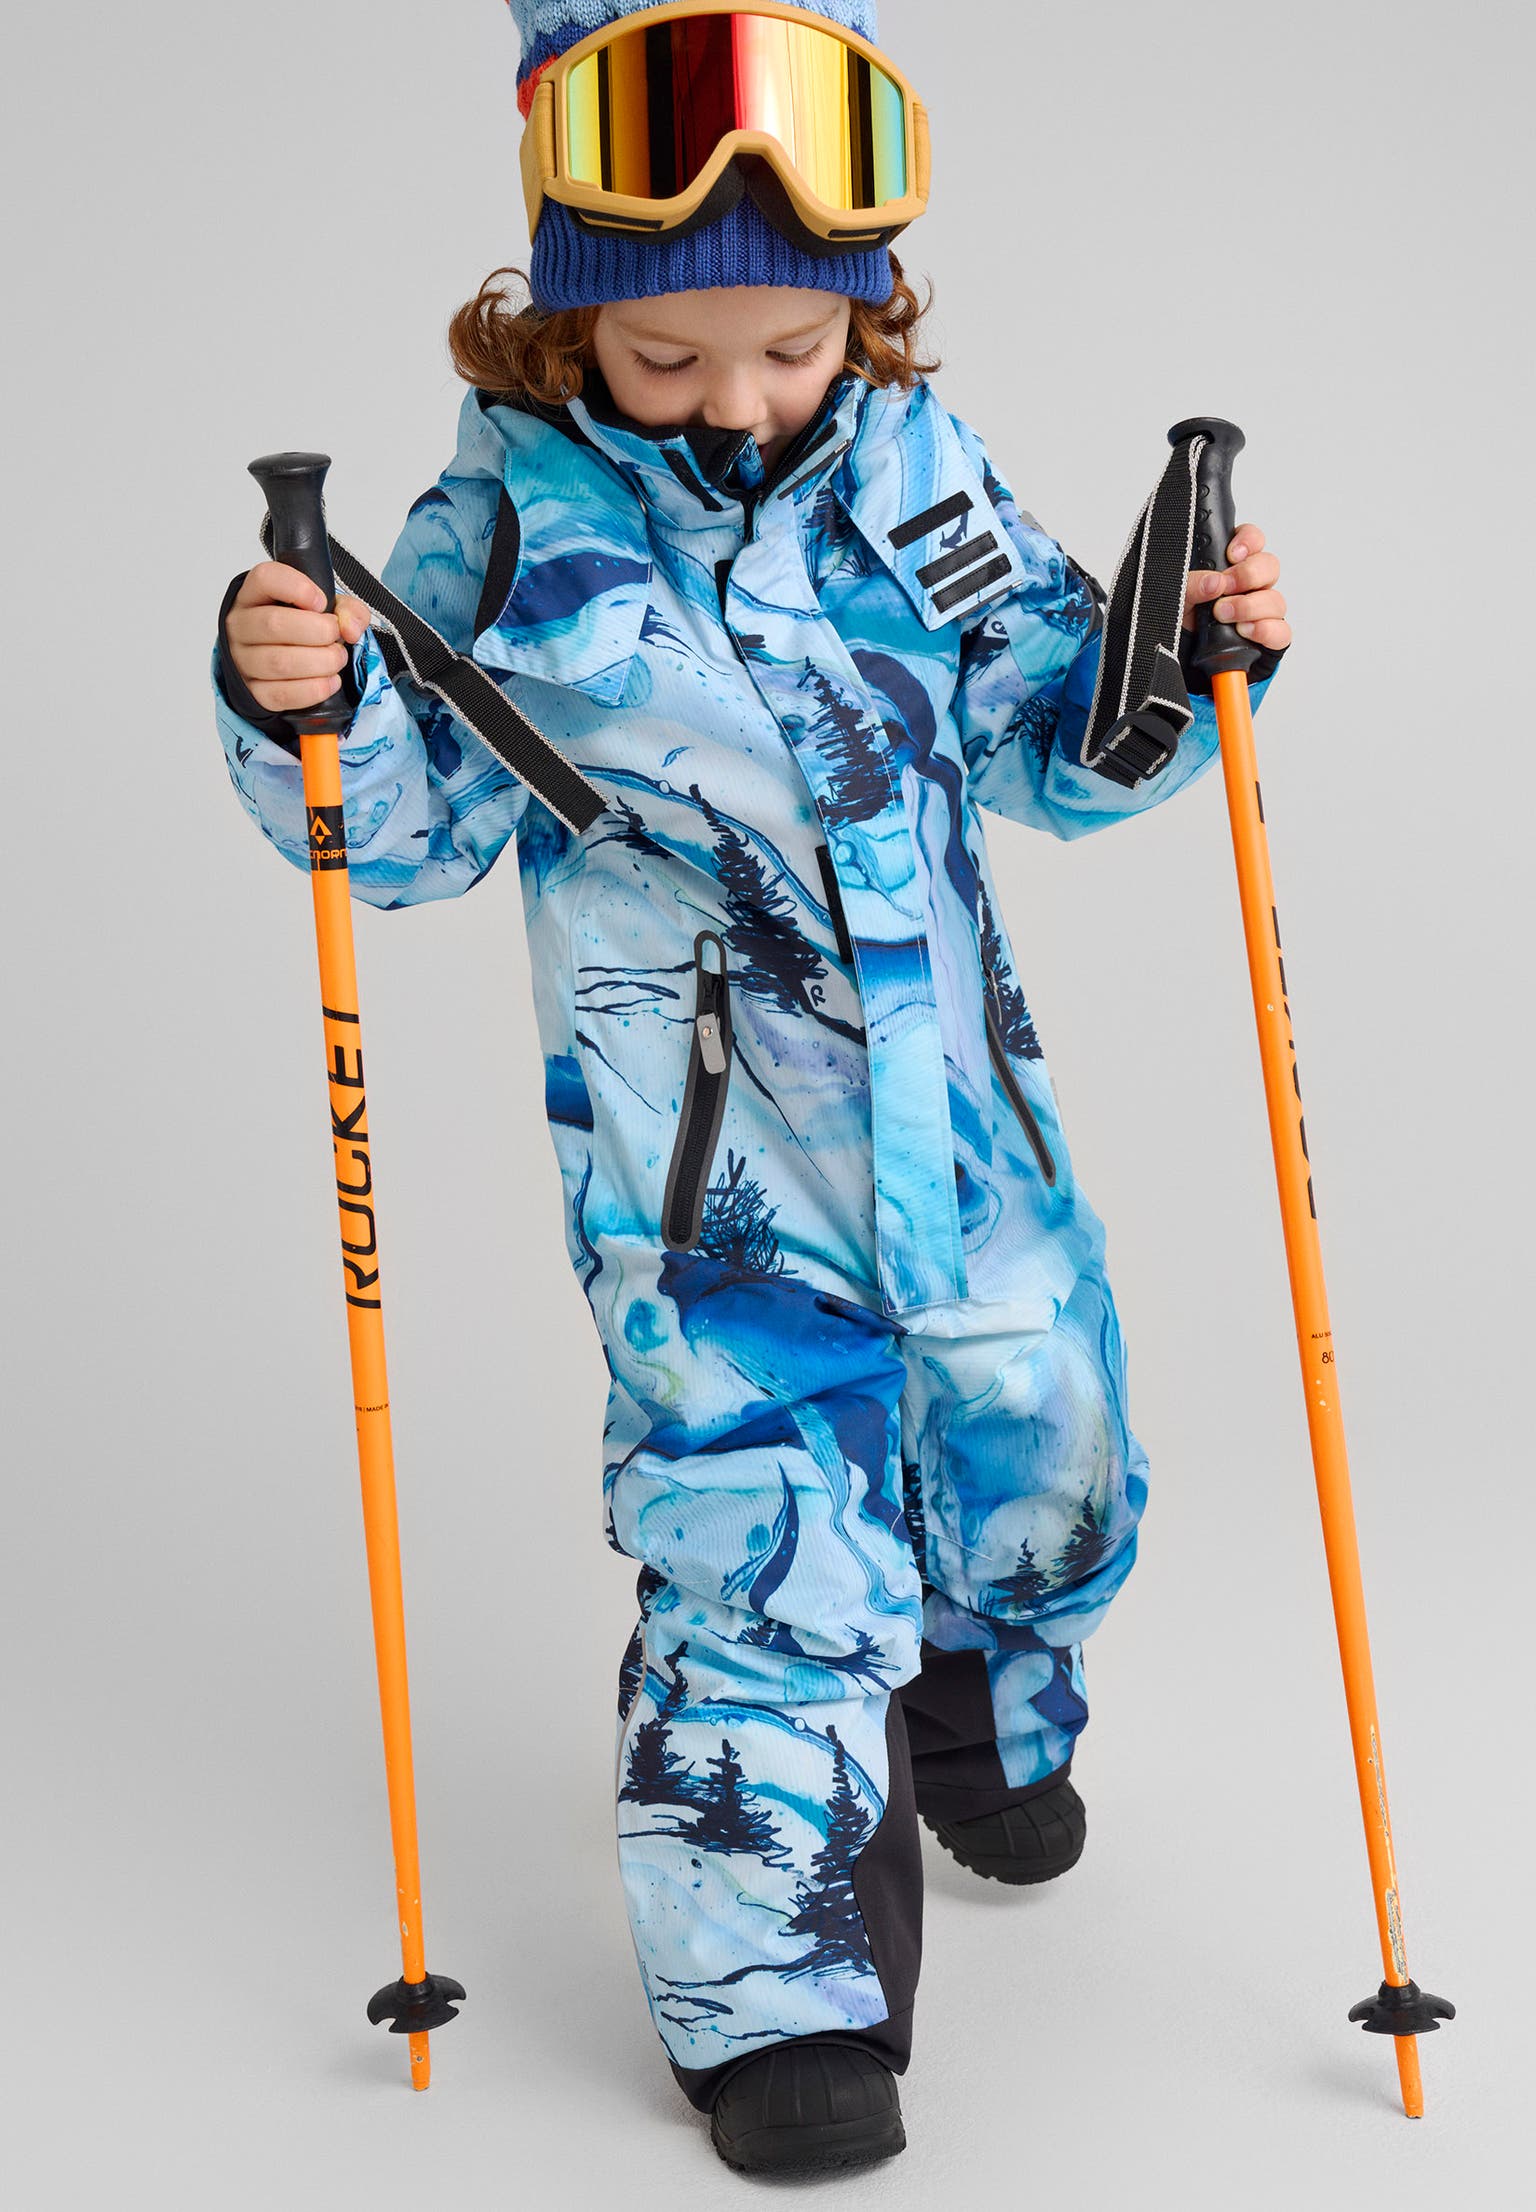 Shop Children's Snow Pants and Ski Bibs from Reima US